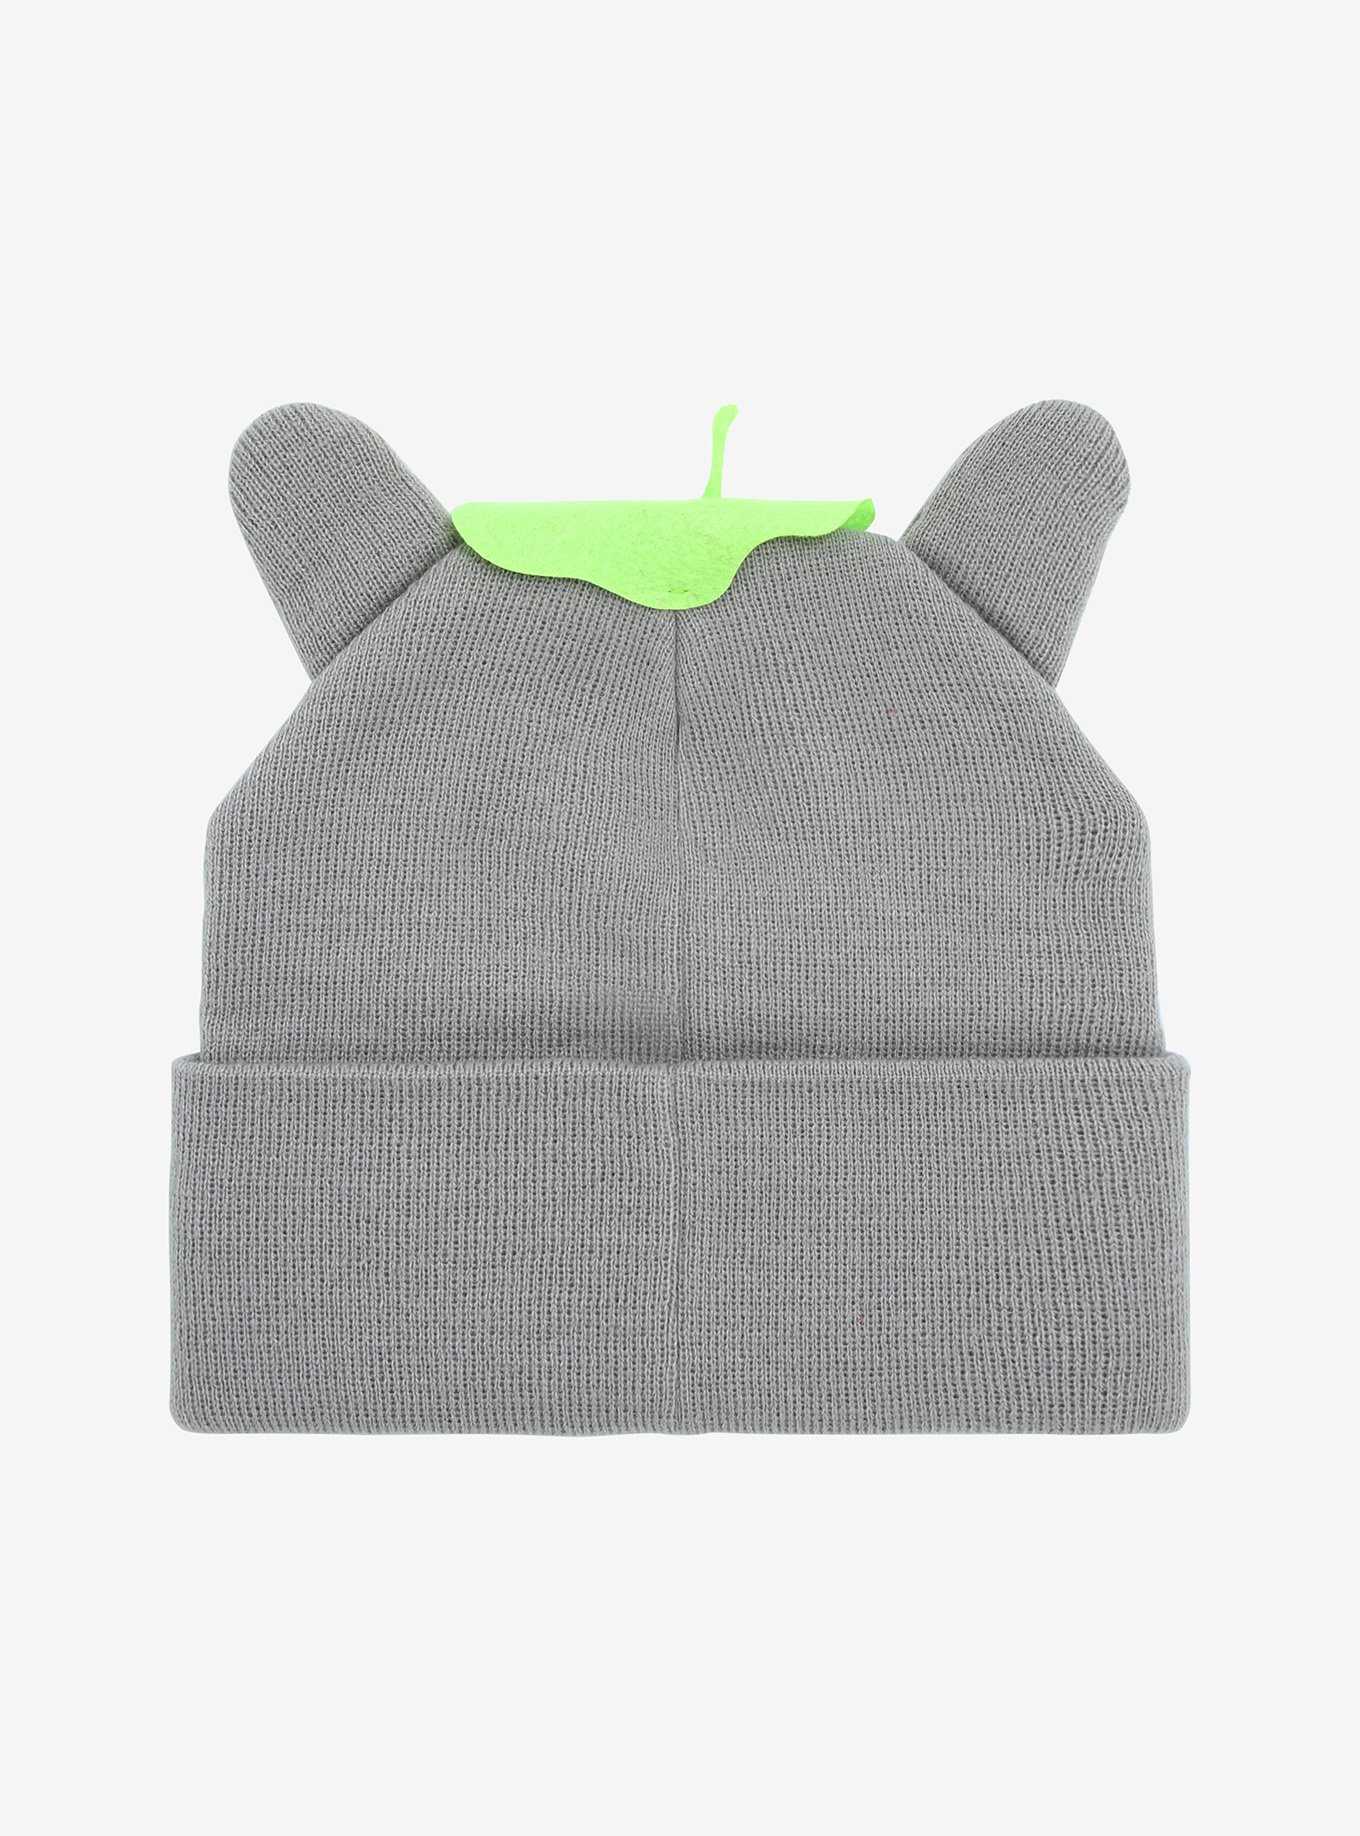 Cool Beanies: Slouchy, | BoxLunch Trendy Beanies Pop & Culture